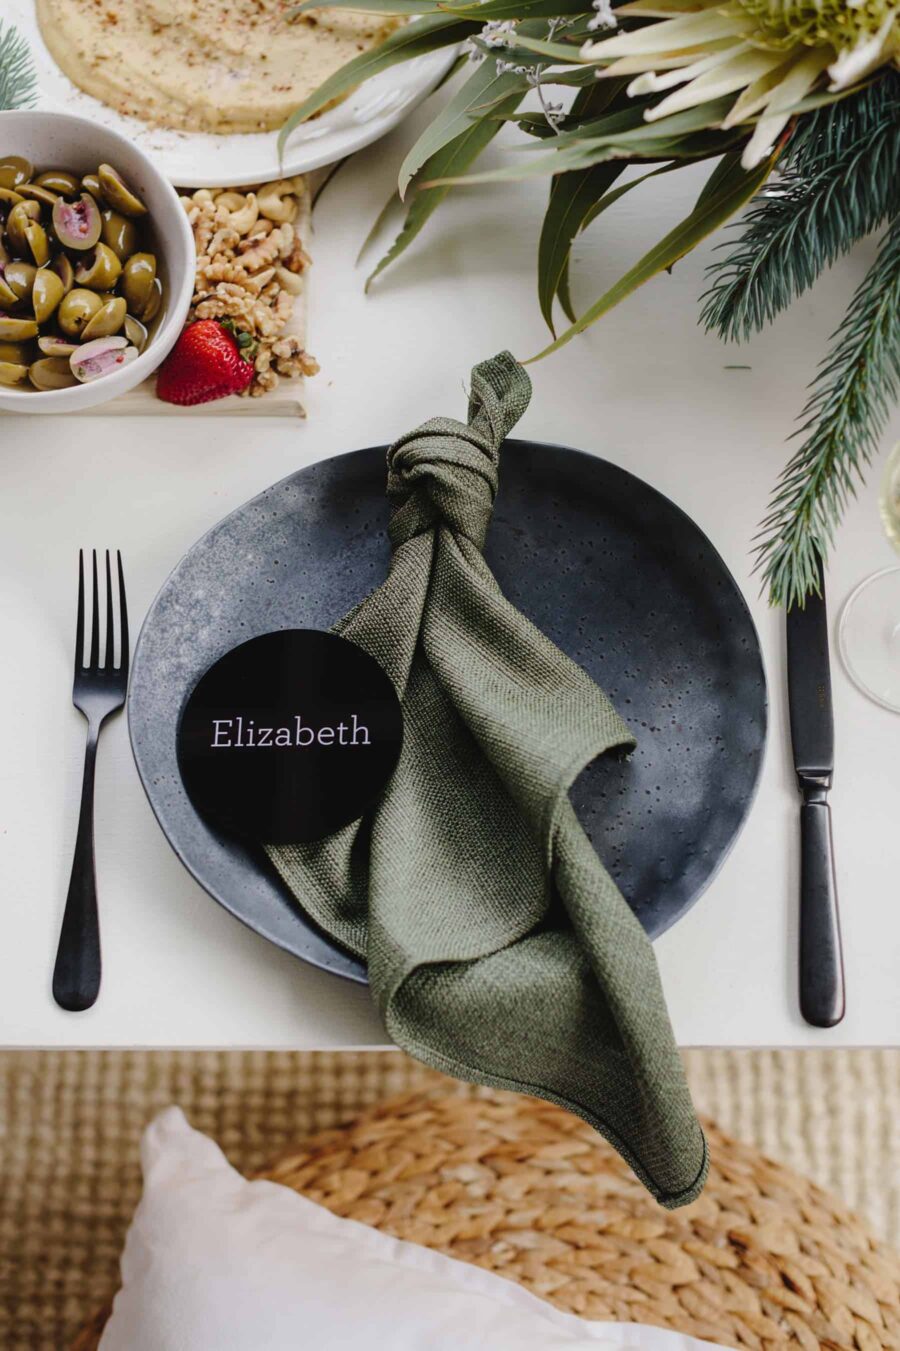 tied linen napkin on black plate with round acrylic place card